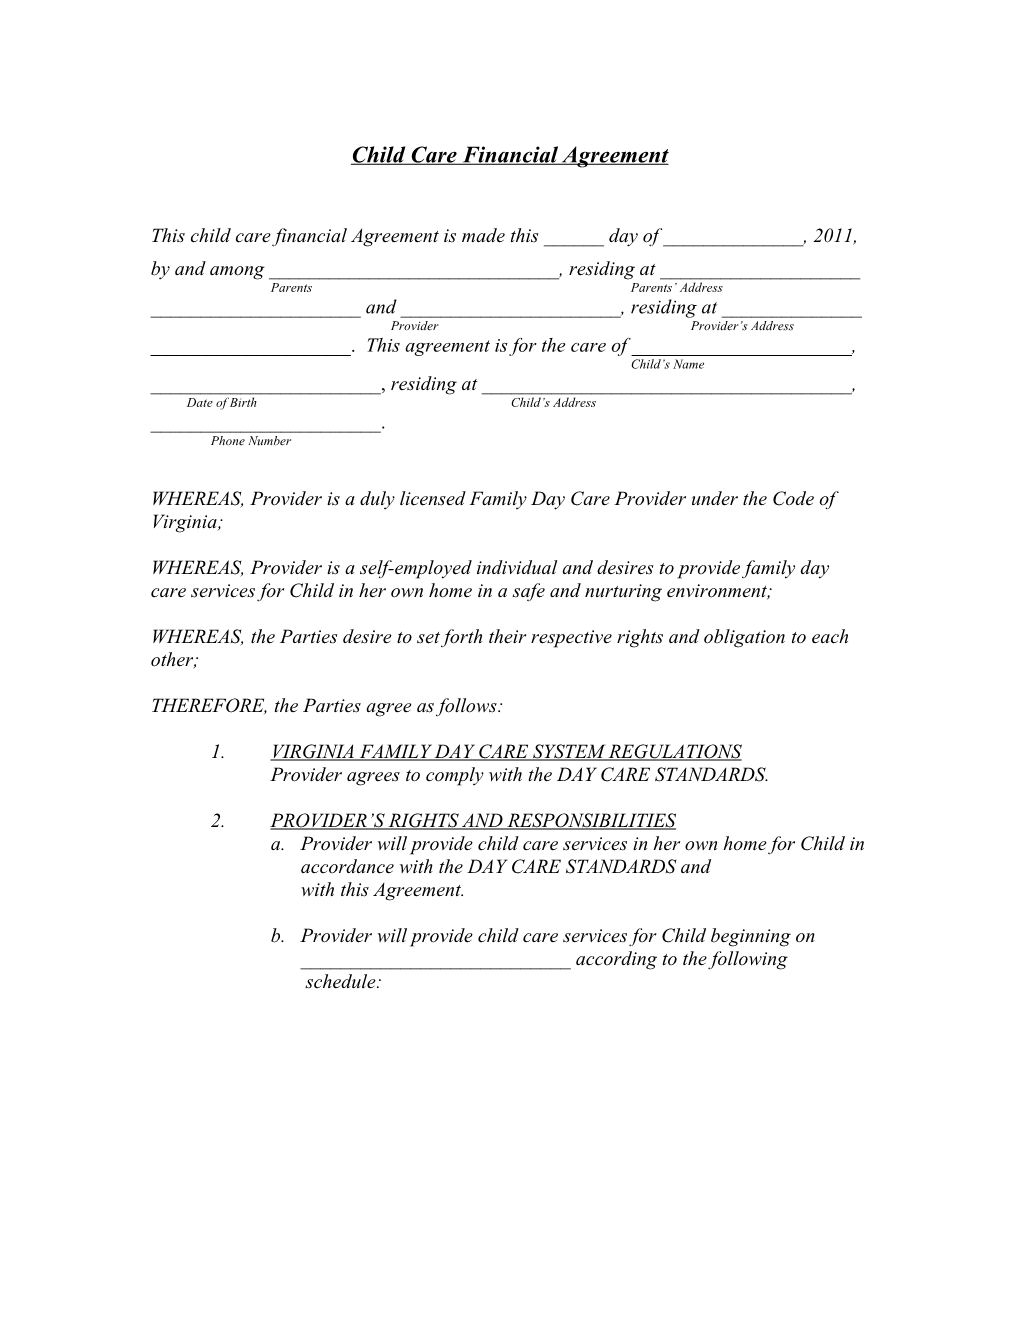 Child Care Financial Agreement